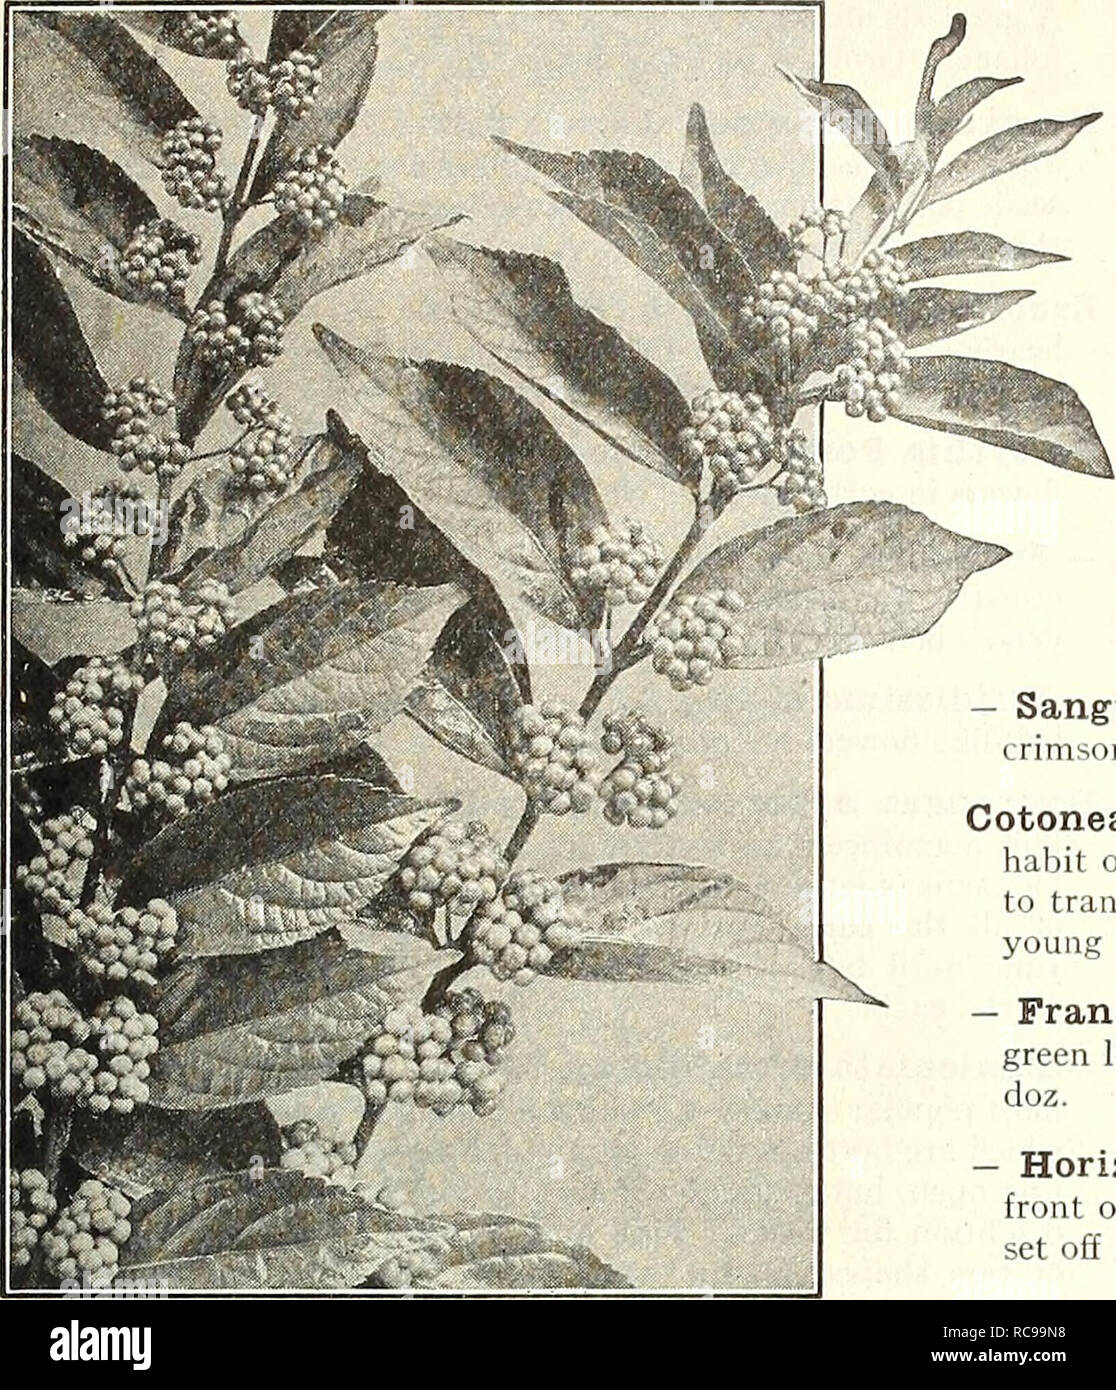 . Dreer's garden book 1923. Seeds Catalogs; Nursery stock Catalogs; Gardening Equipment and supplies Catalogs; Flowers Seeds Catalogs; Vegetables Seeds Catalogs; Fruit Seeds Catalogs. li CHQICE HARDY SHRUBS &gt;HILBeiPM]k ^ 199. Callicarpa Purpurea Corchorus or Kerria Japonica PI. PI. (Globe-flower). A particularly valuable shrub on account of its clean, graceful hal.iil of growth and its free and continuous flowering, producing its attractive double golden-yellow flowers continuously from June to October. 60 cts. each. Cornus Alba Sibirica (Siberian Dogwood). A strong growing variety, crimso Stock Photo